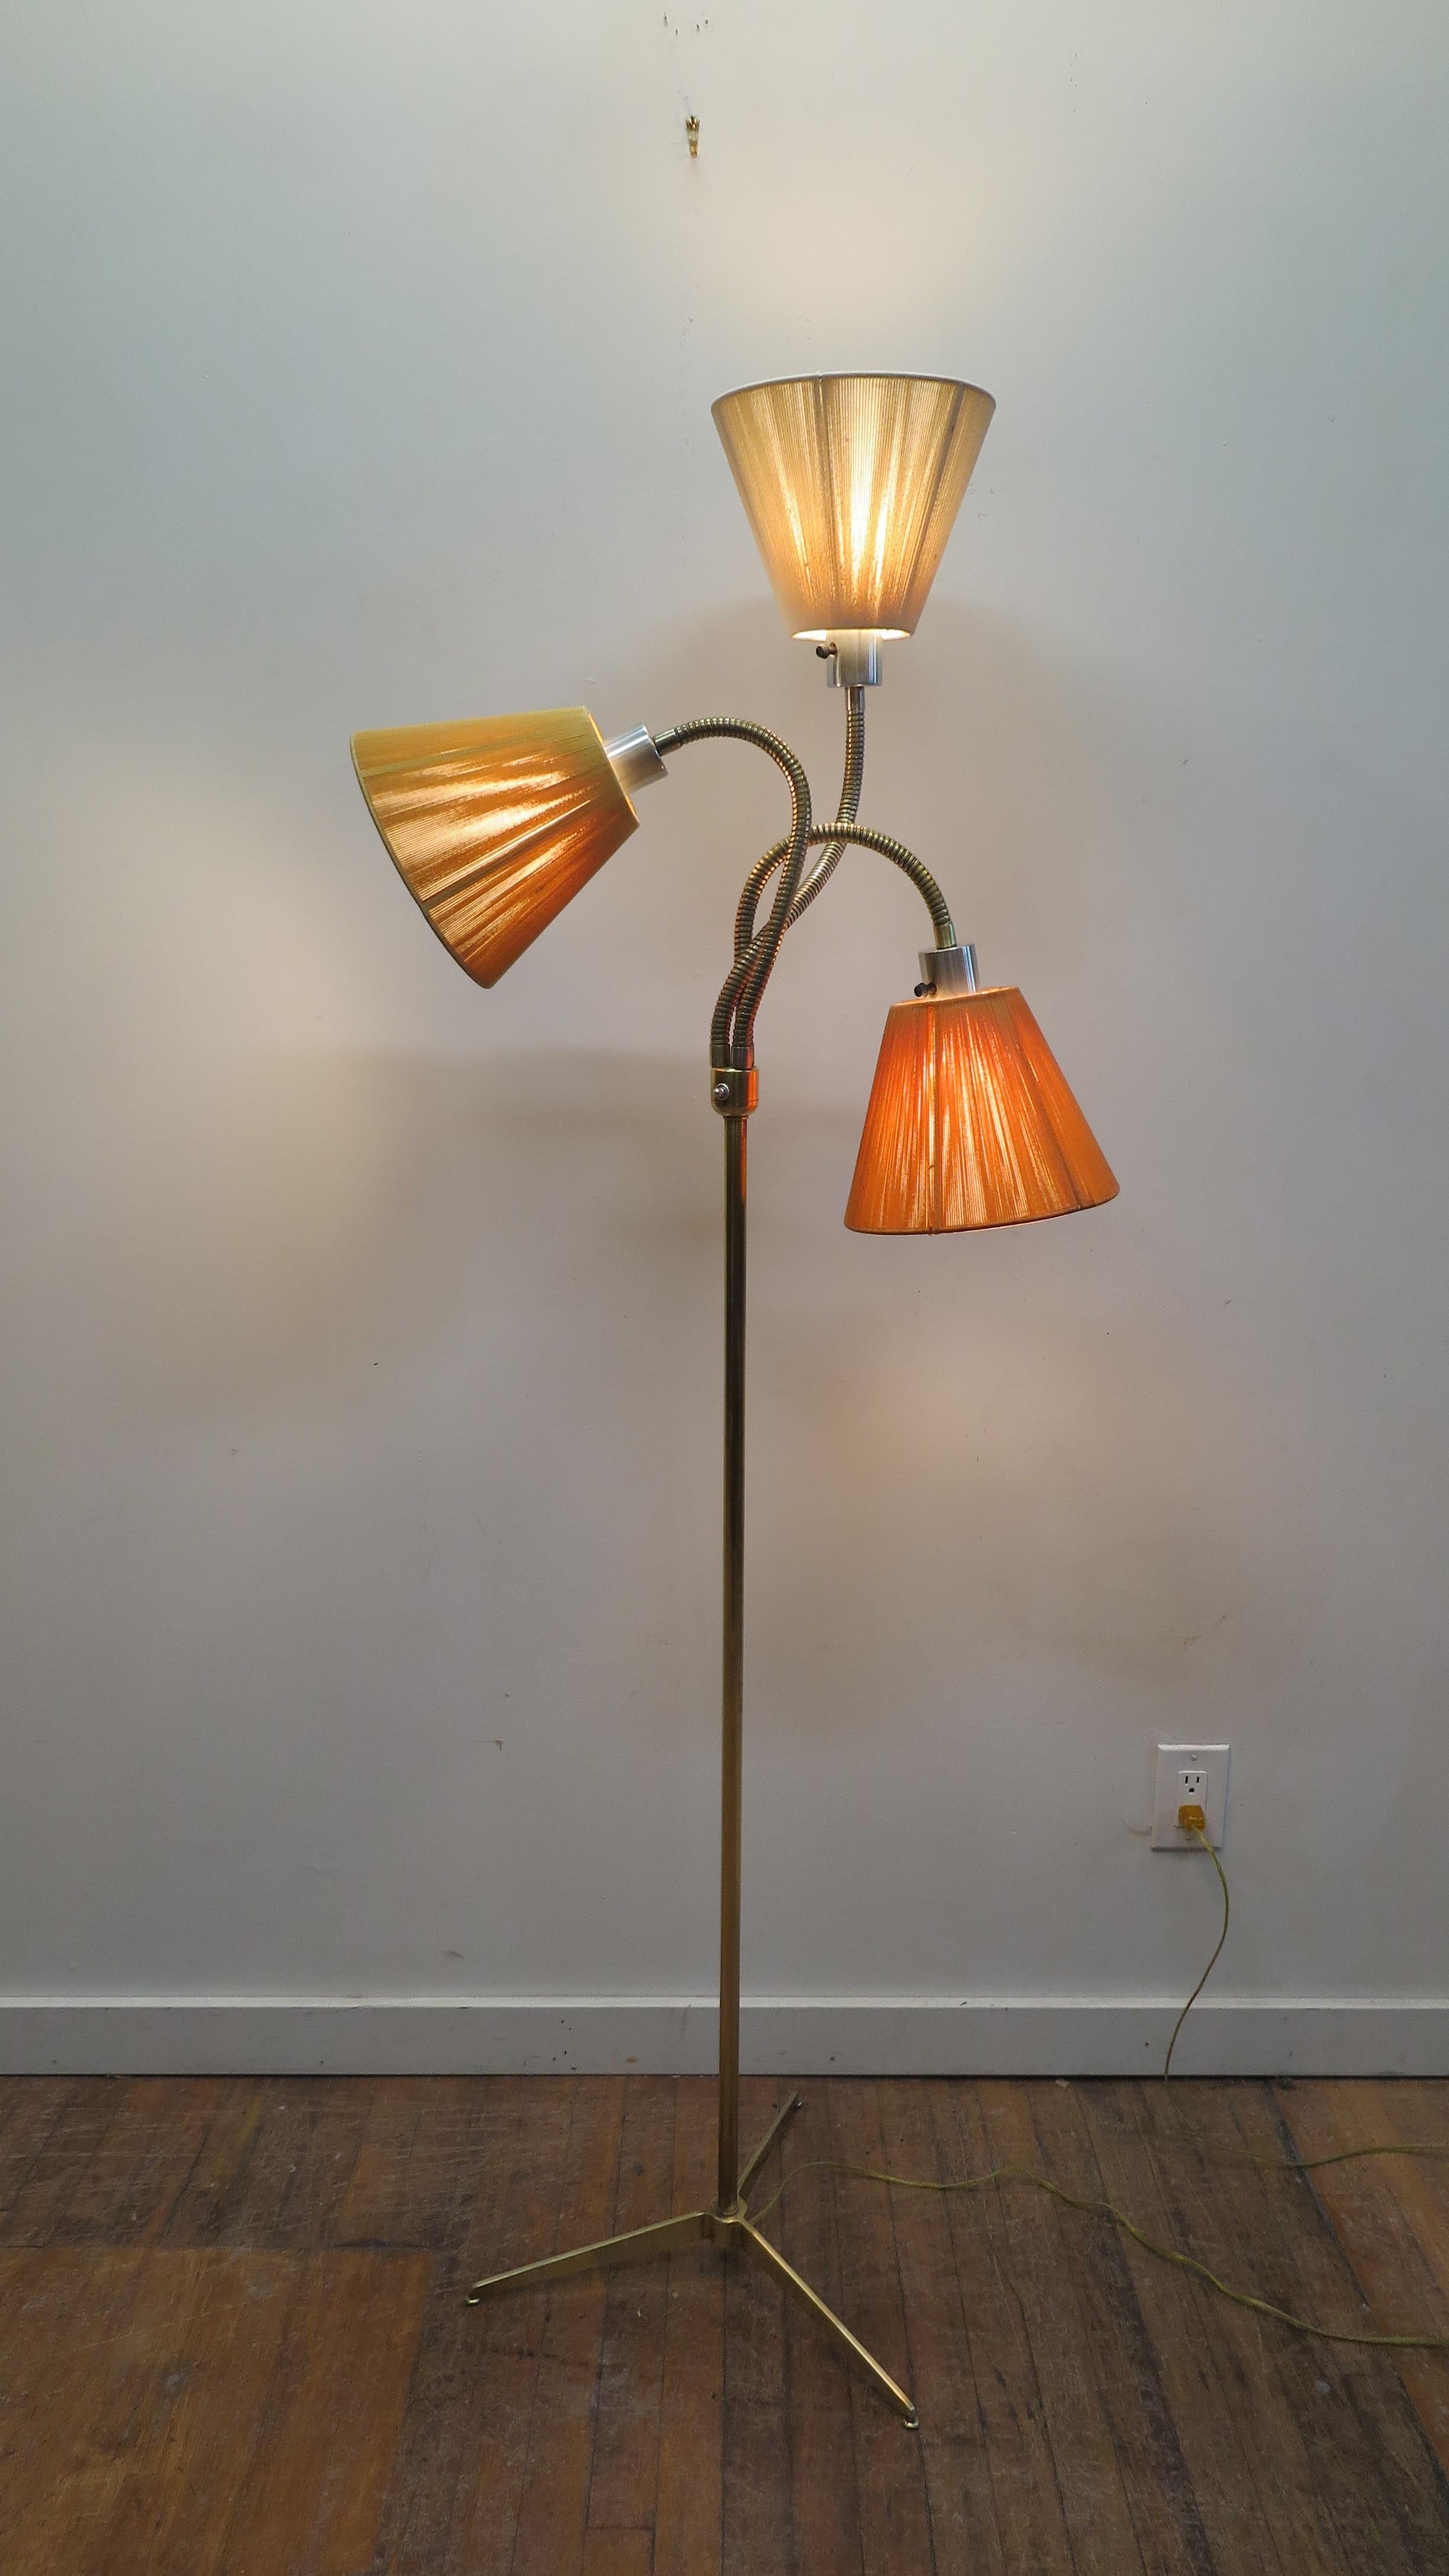 American midcentury brass floor lamp Triennale attributed to Gerald Thurston Lightoleir.  Modernist brass floor lamp on tripod brass legs, brass pole showcasing three goose neck fixtures with original string wrapped shades. Shades are faded showing